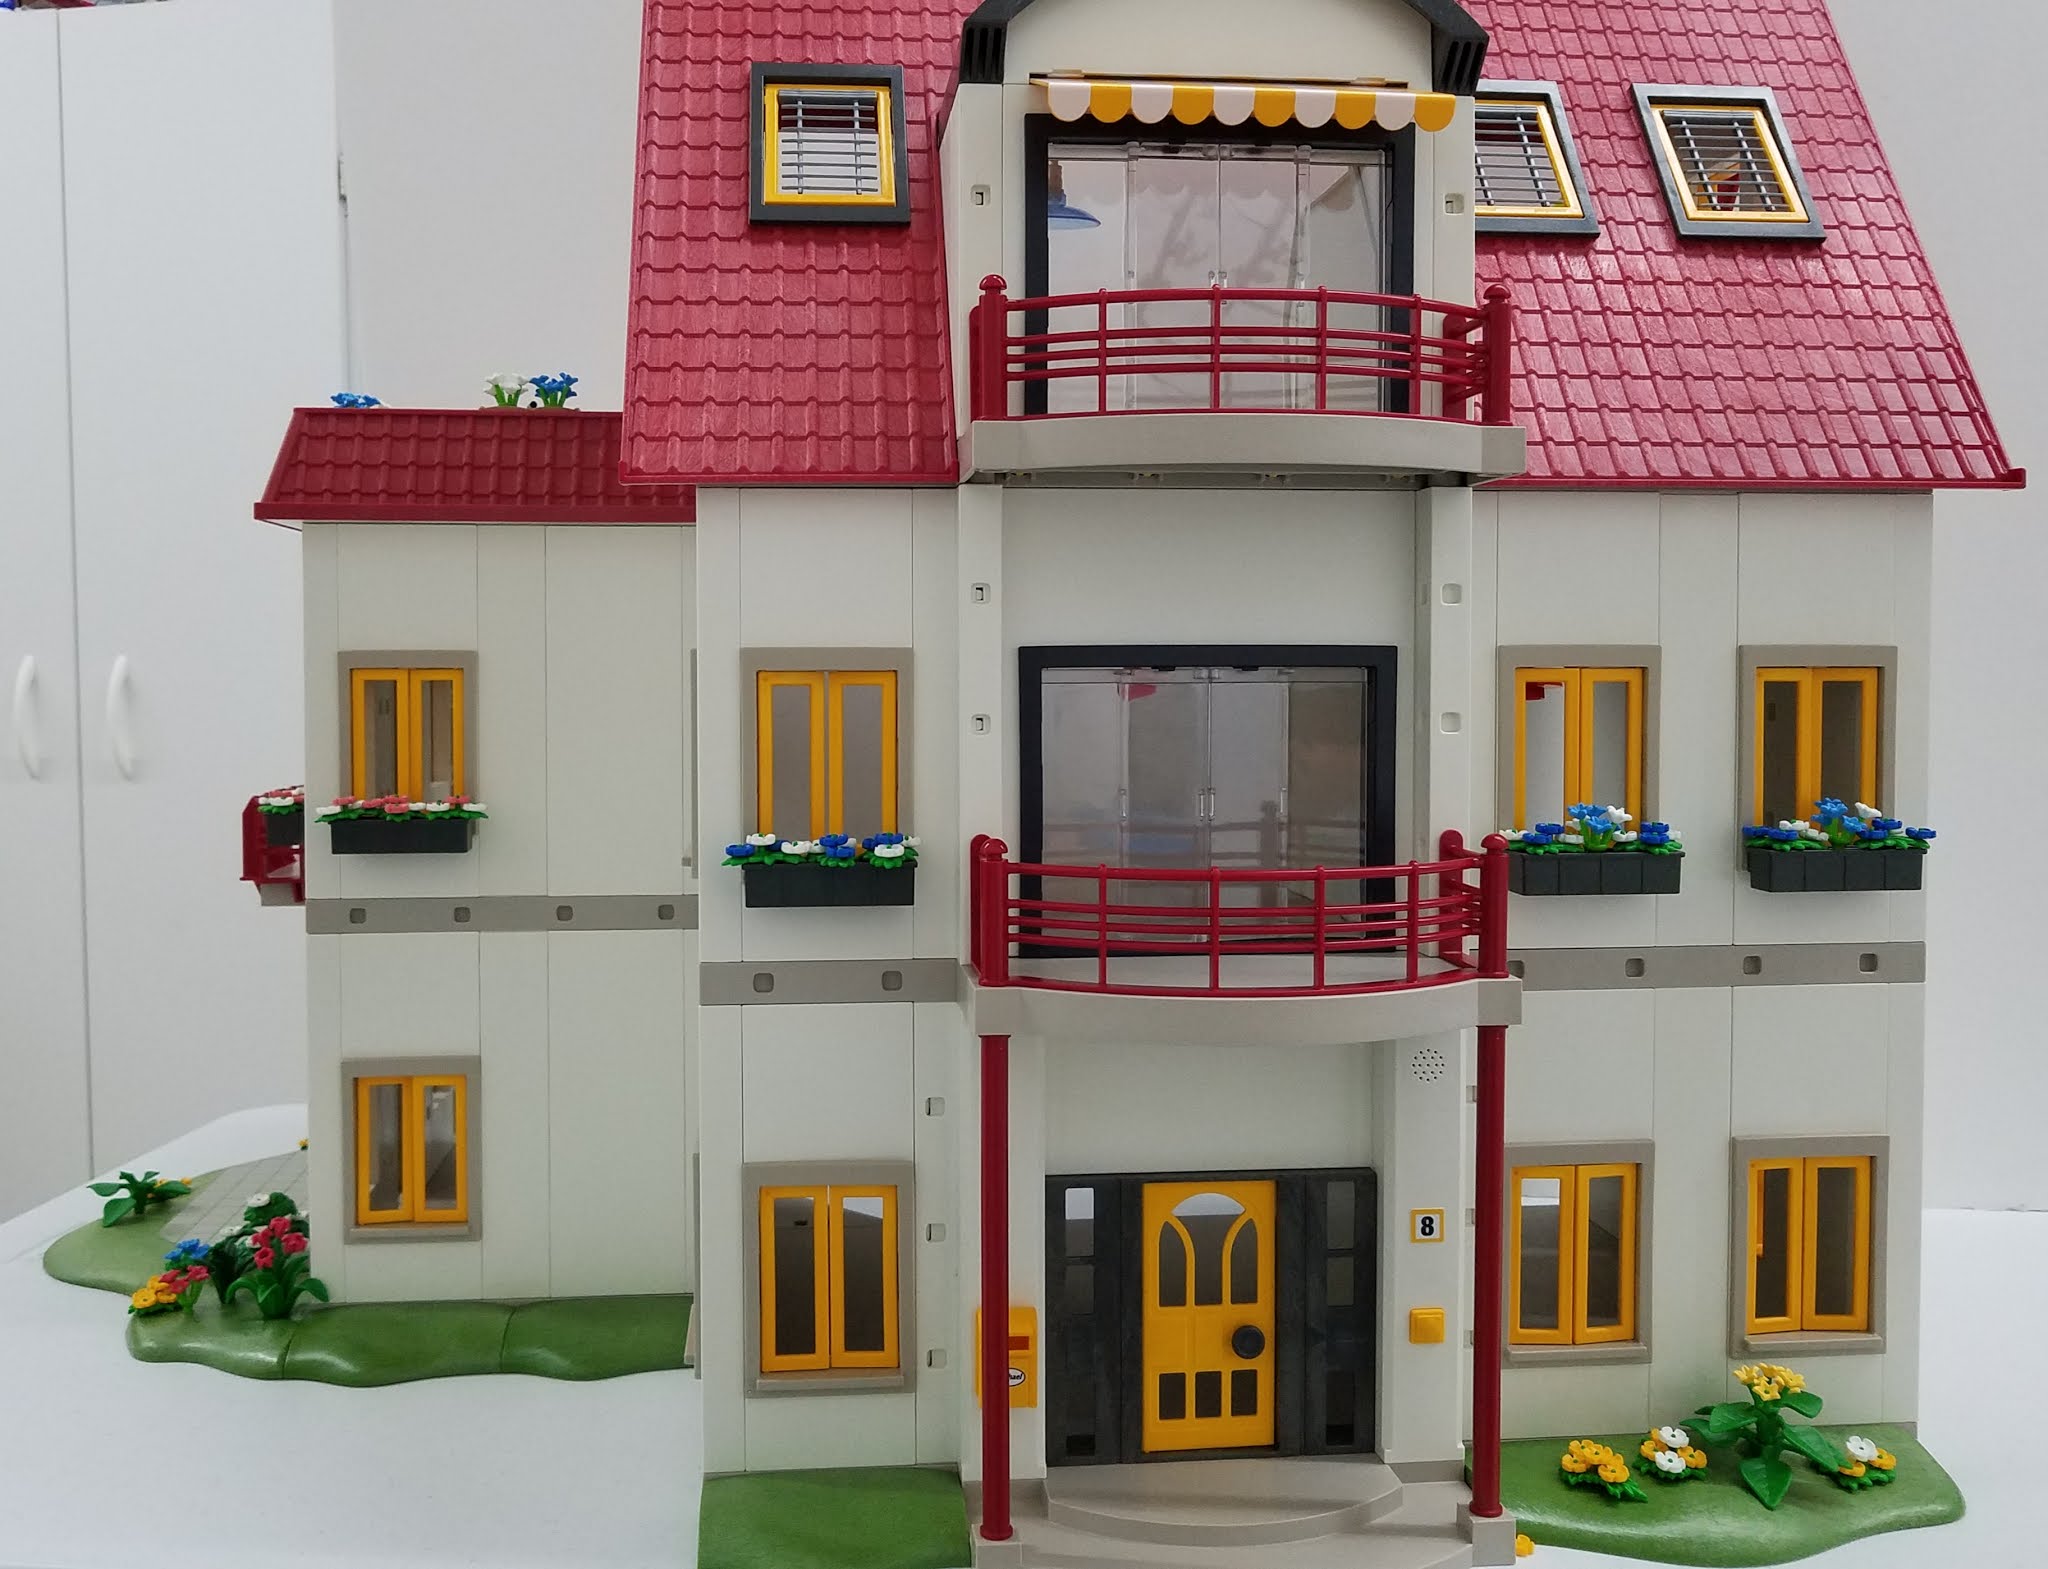 Playmobil Add-On Series - Deluxe Dollhouse Extension B